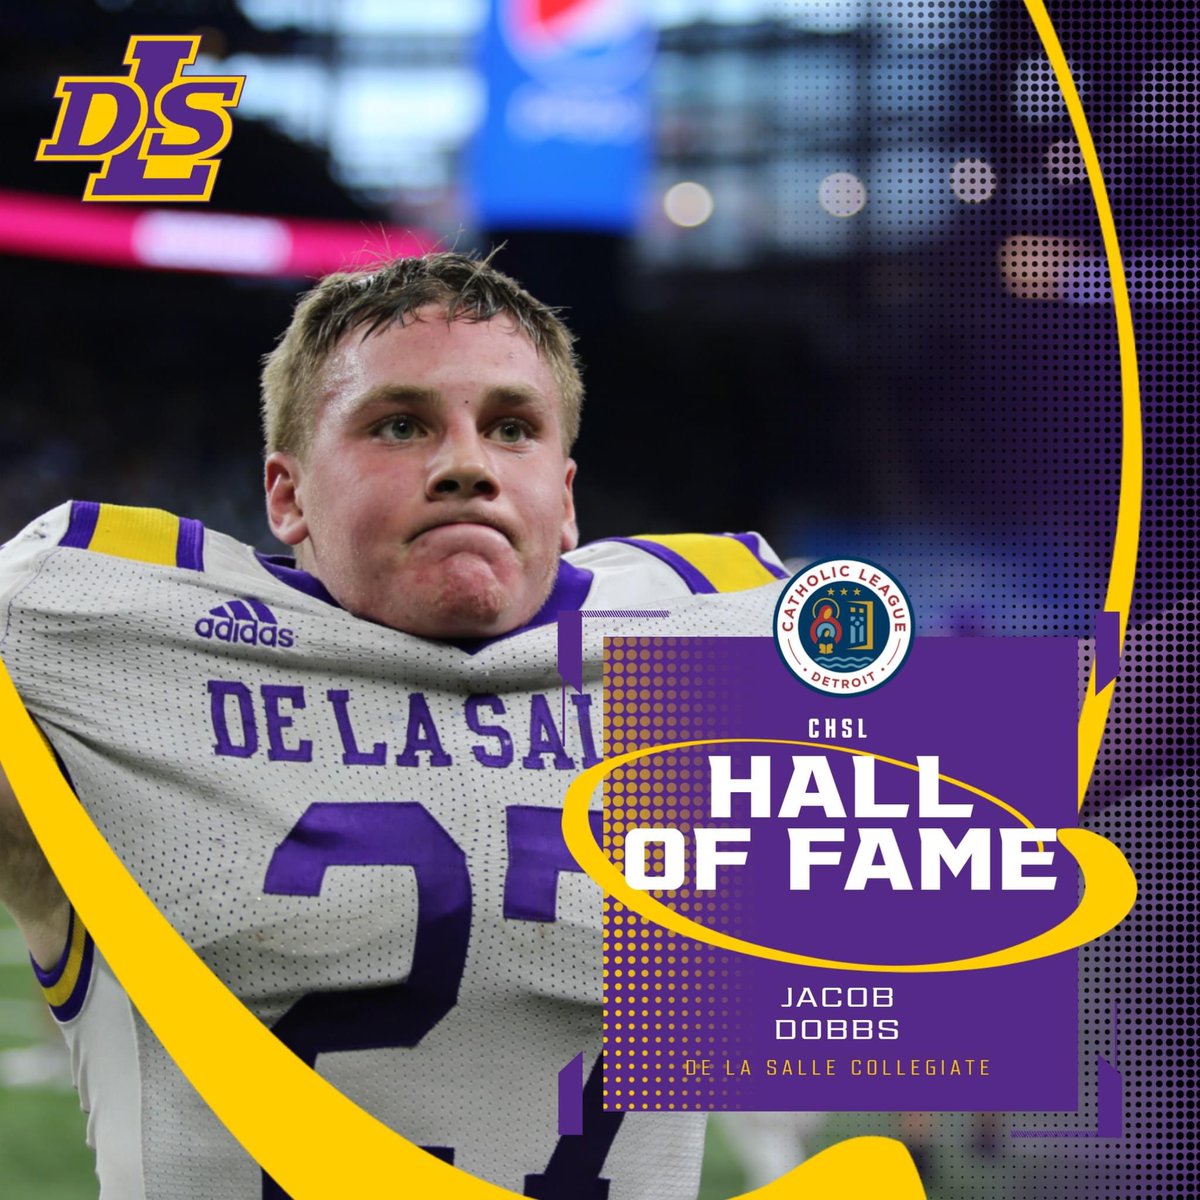 Congratulations to Jacob Dobbs, '19 who will be inducted into the @CHSL1926 Hall of Fame on June 10. During his time at DLS Jacob was a 2 time- state champion, selected to the Detroit News/Detroit Free Press Dream Team & named First-Team All-State by the AP.